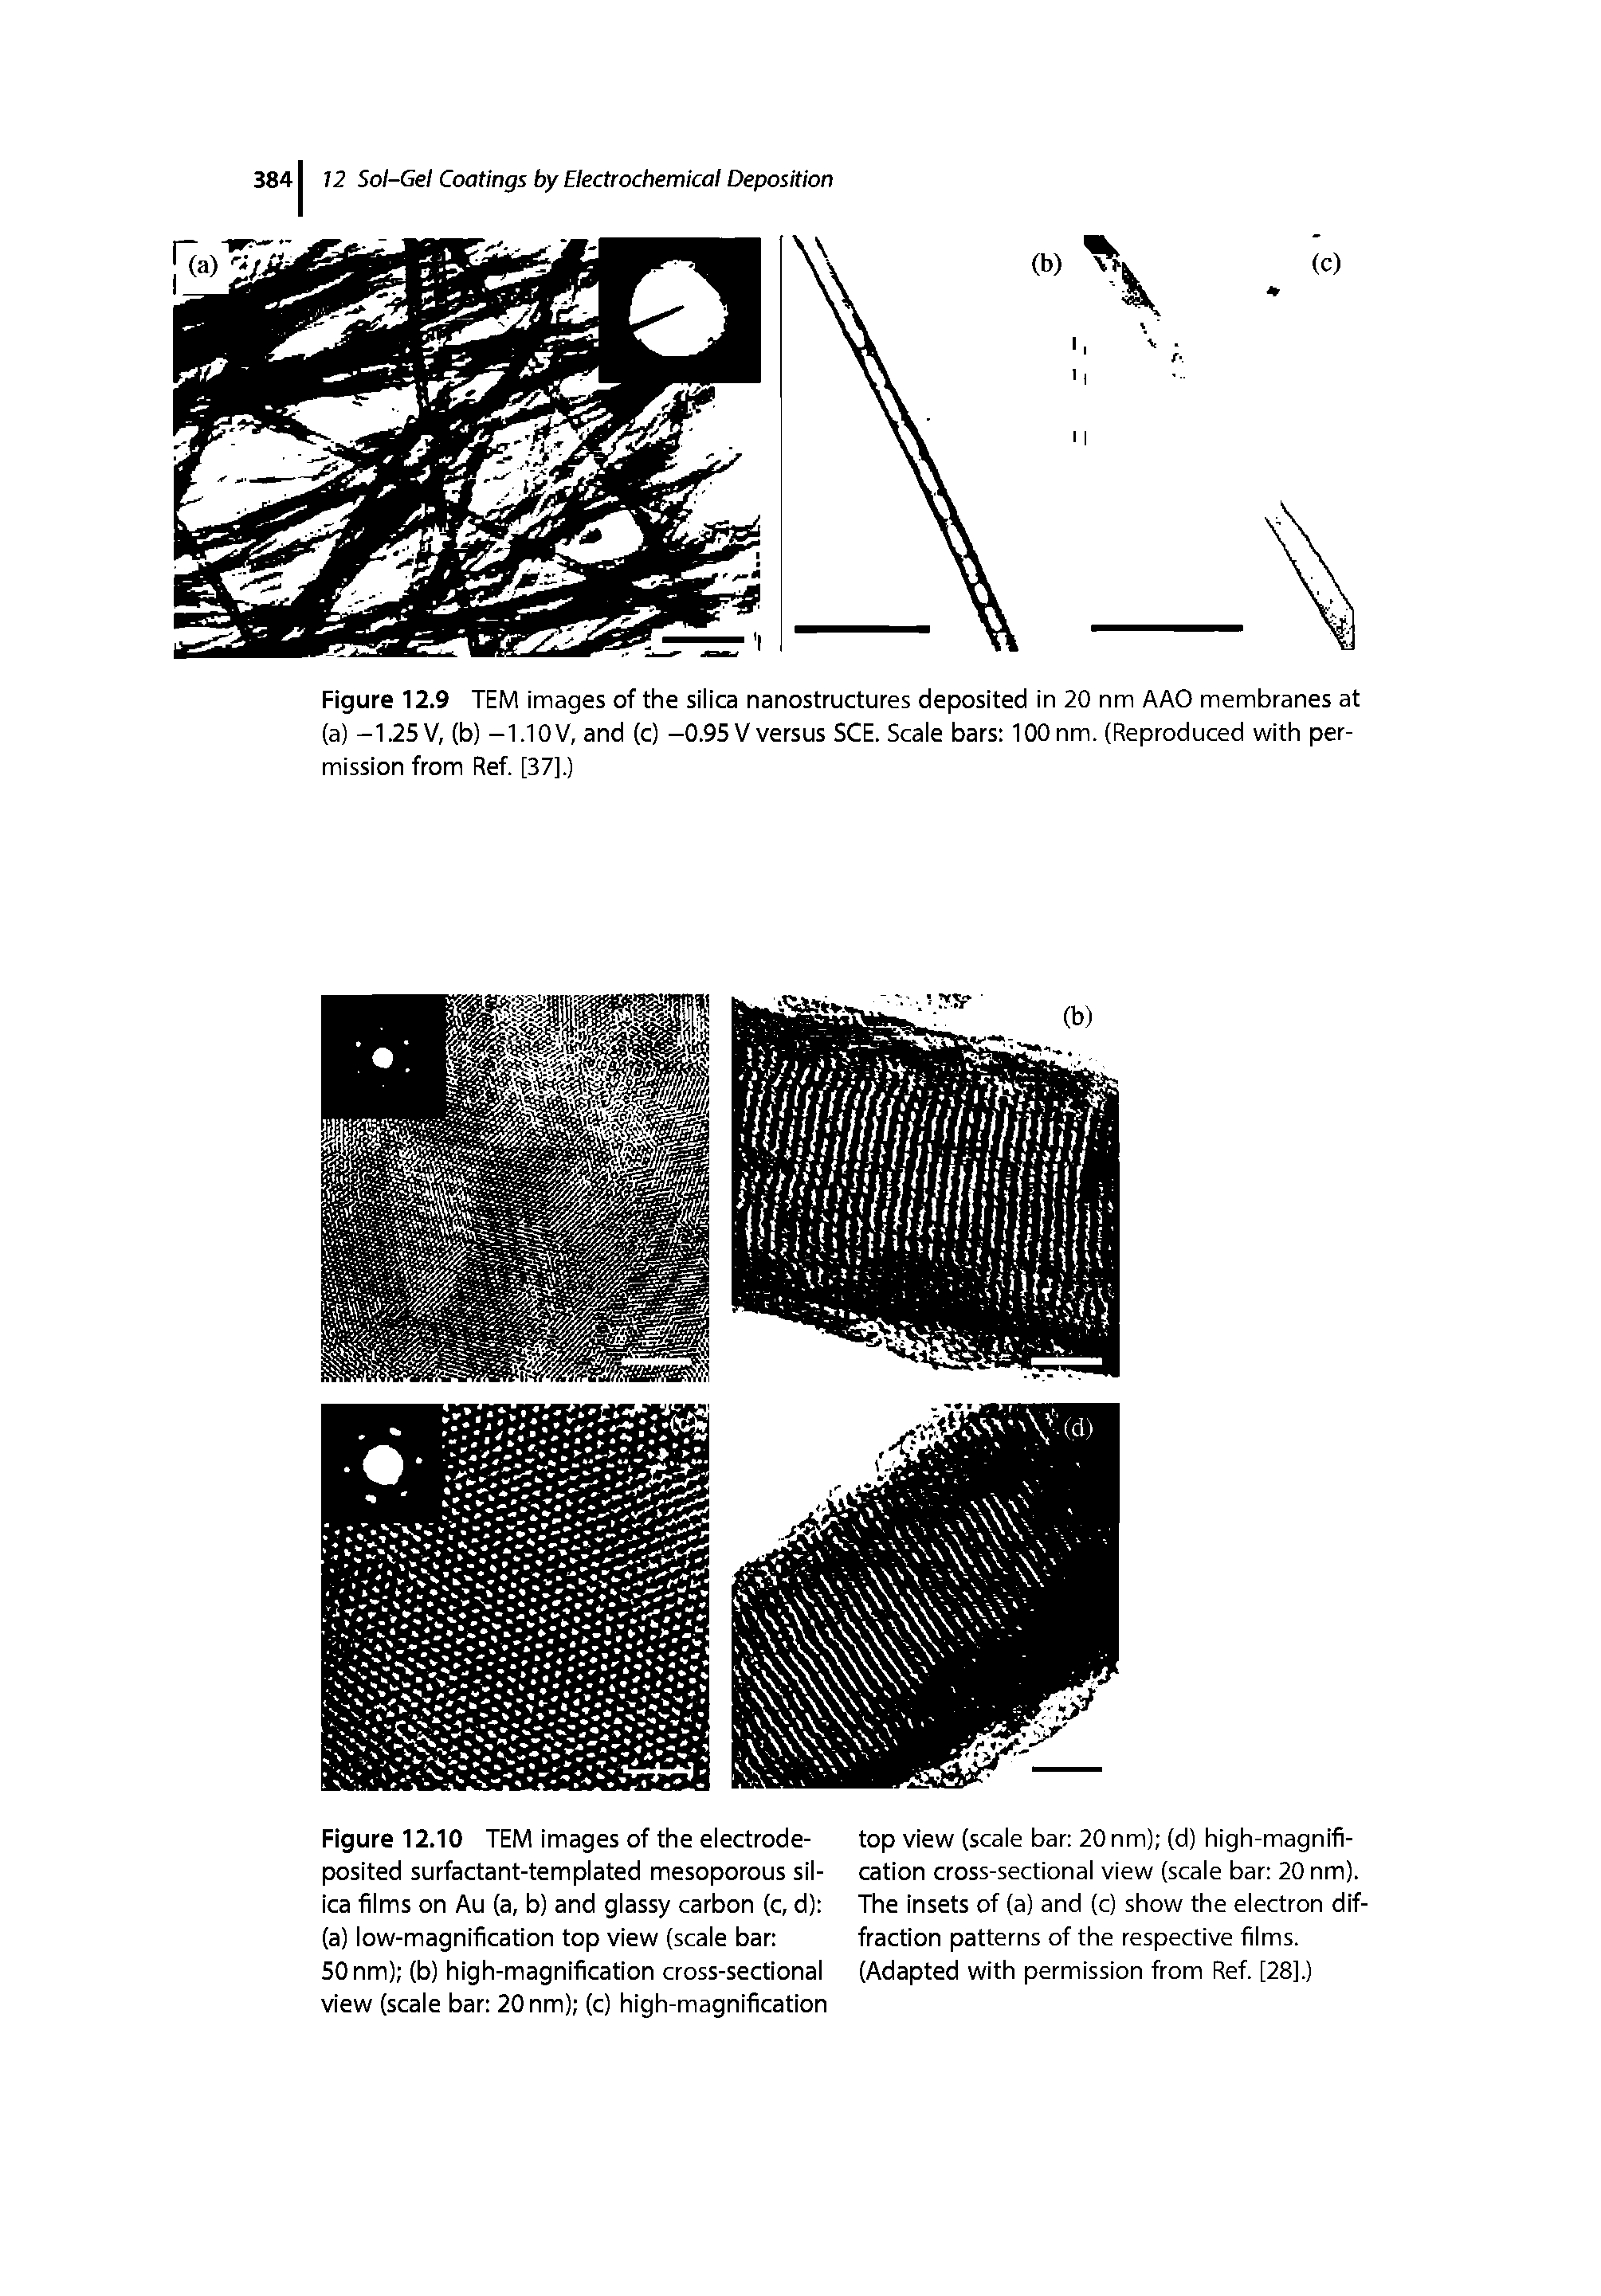 Figure 12.10 TEM images of the electrode-posited surfactant-templated mesoporous silica films on Au (a, b) and glassy carbon (c, d) (a) low-magnification top view (scale bar ...